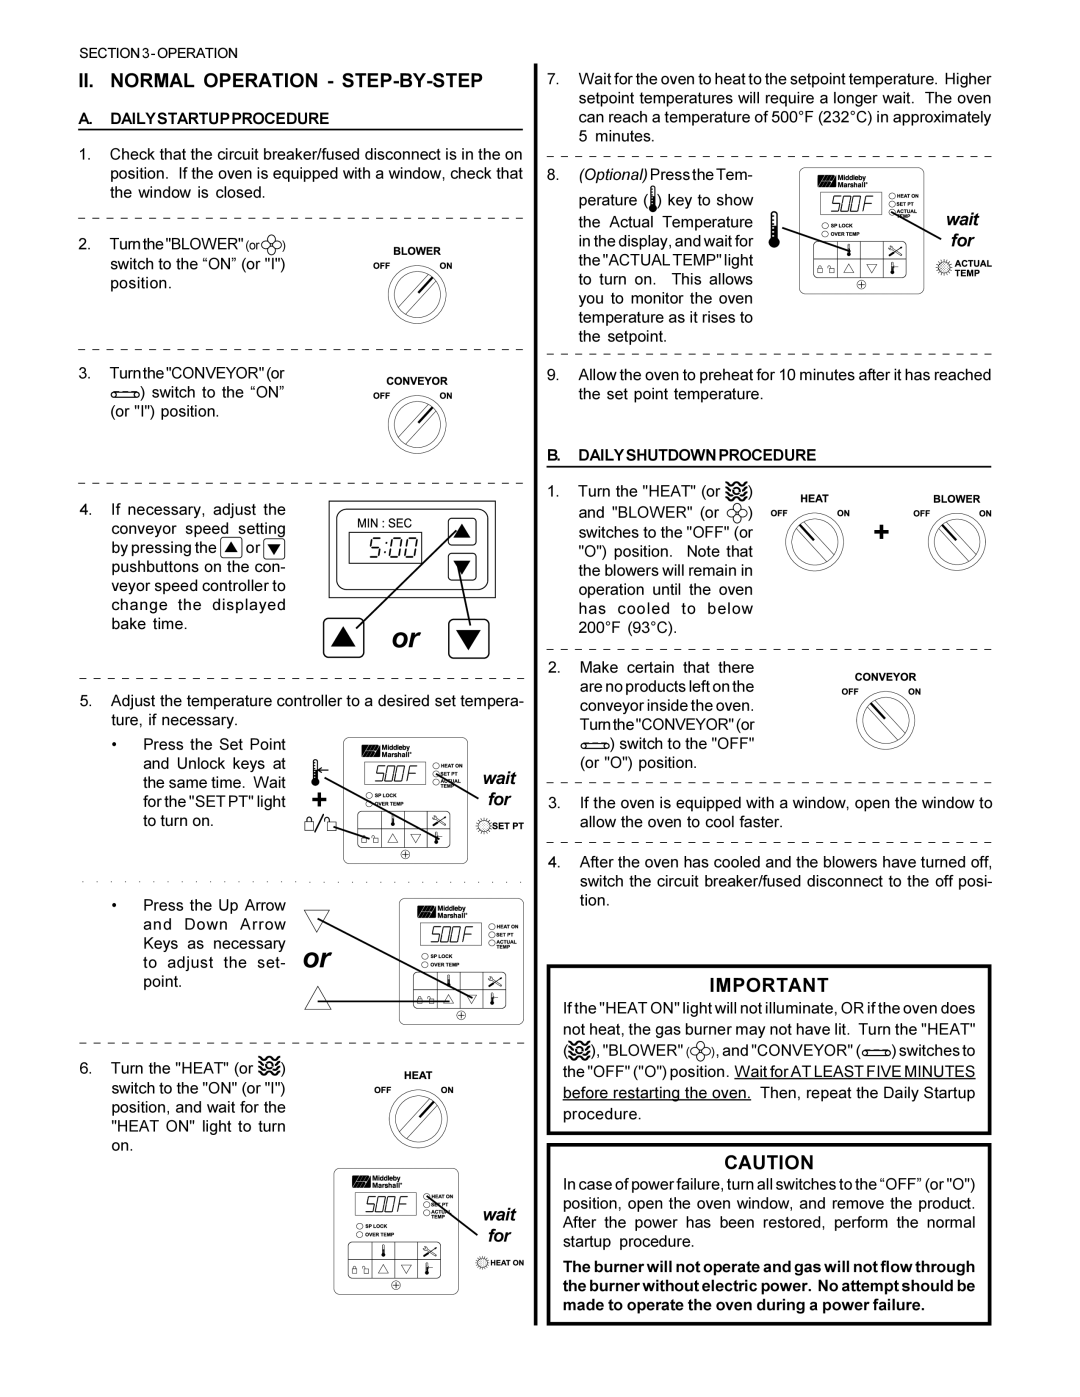 Middleby Marshall PS570S installation manual Ii. Normal Operation - Step-By-Step, wait for, A. Dailystartupprocedure 